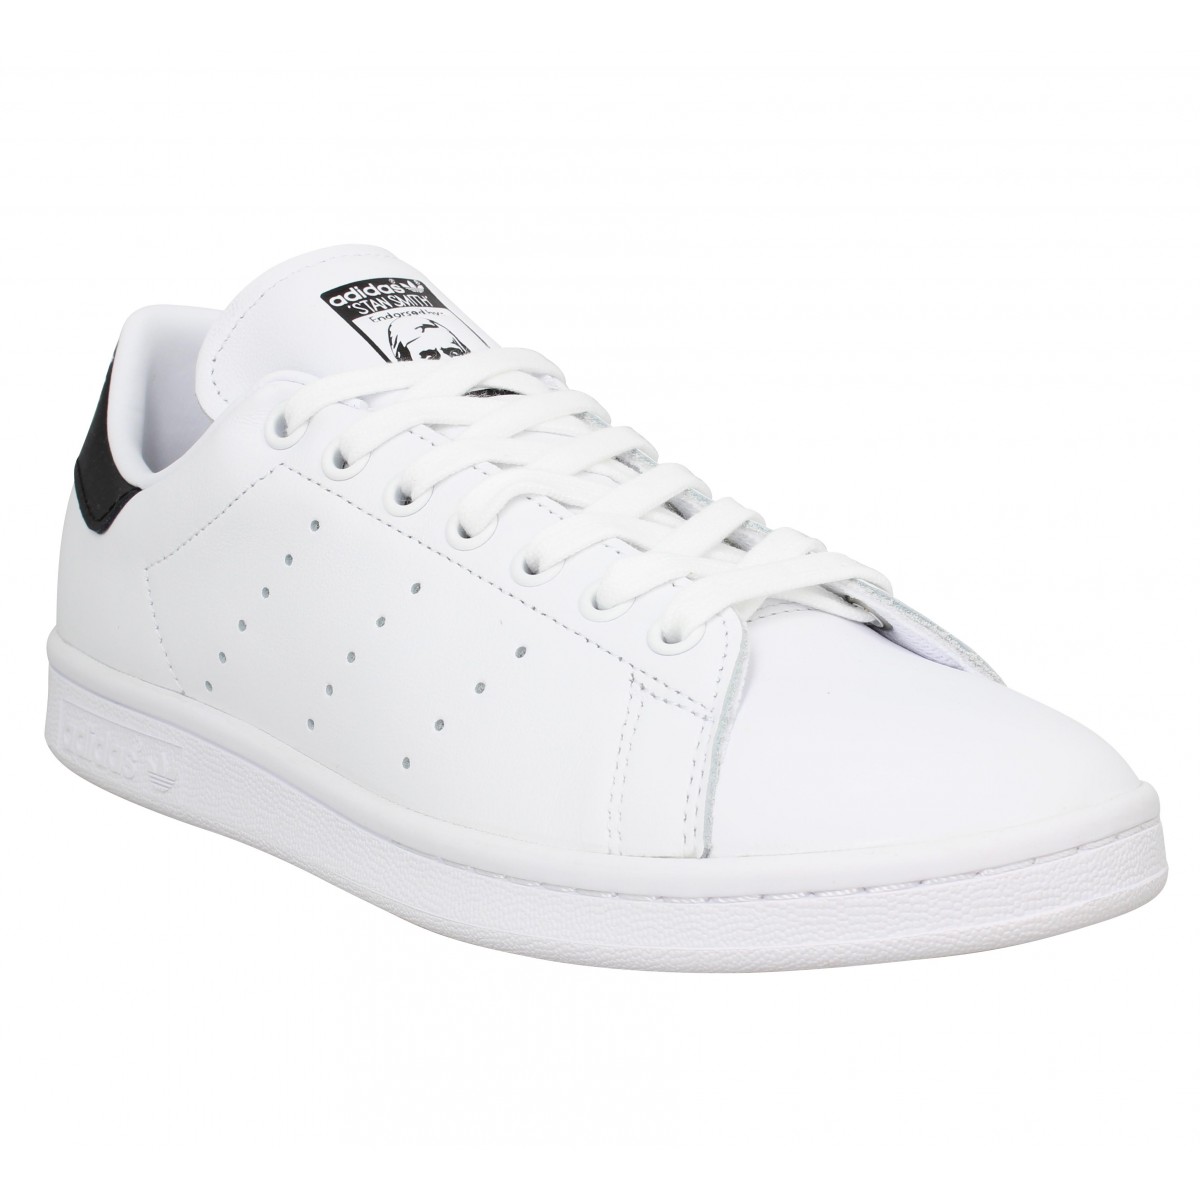 adidas homme stan smith chaussures